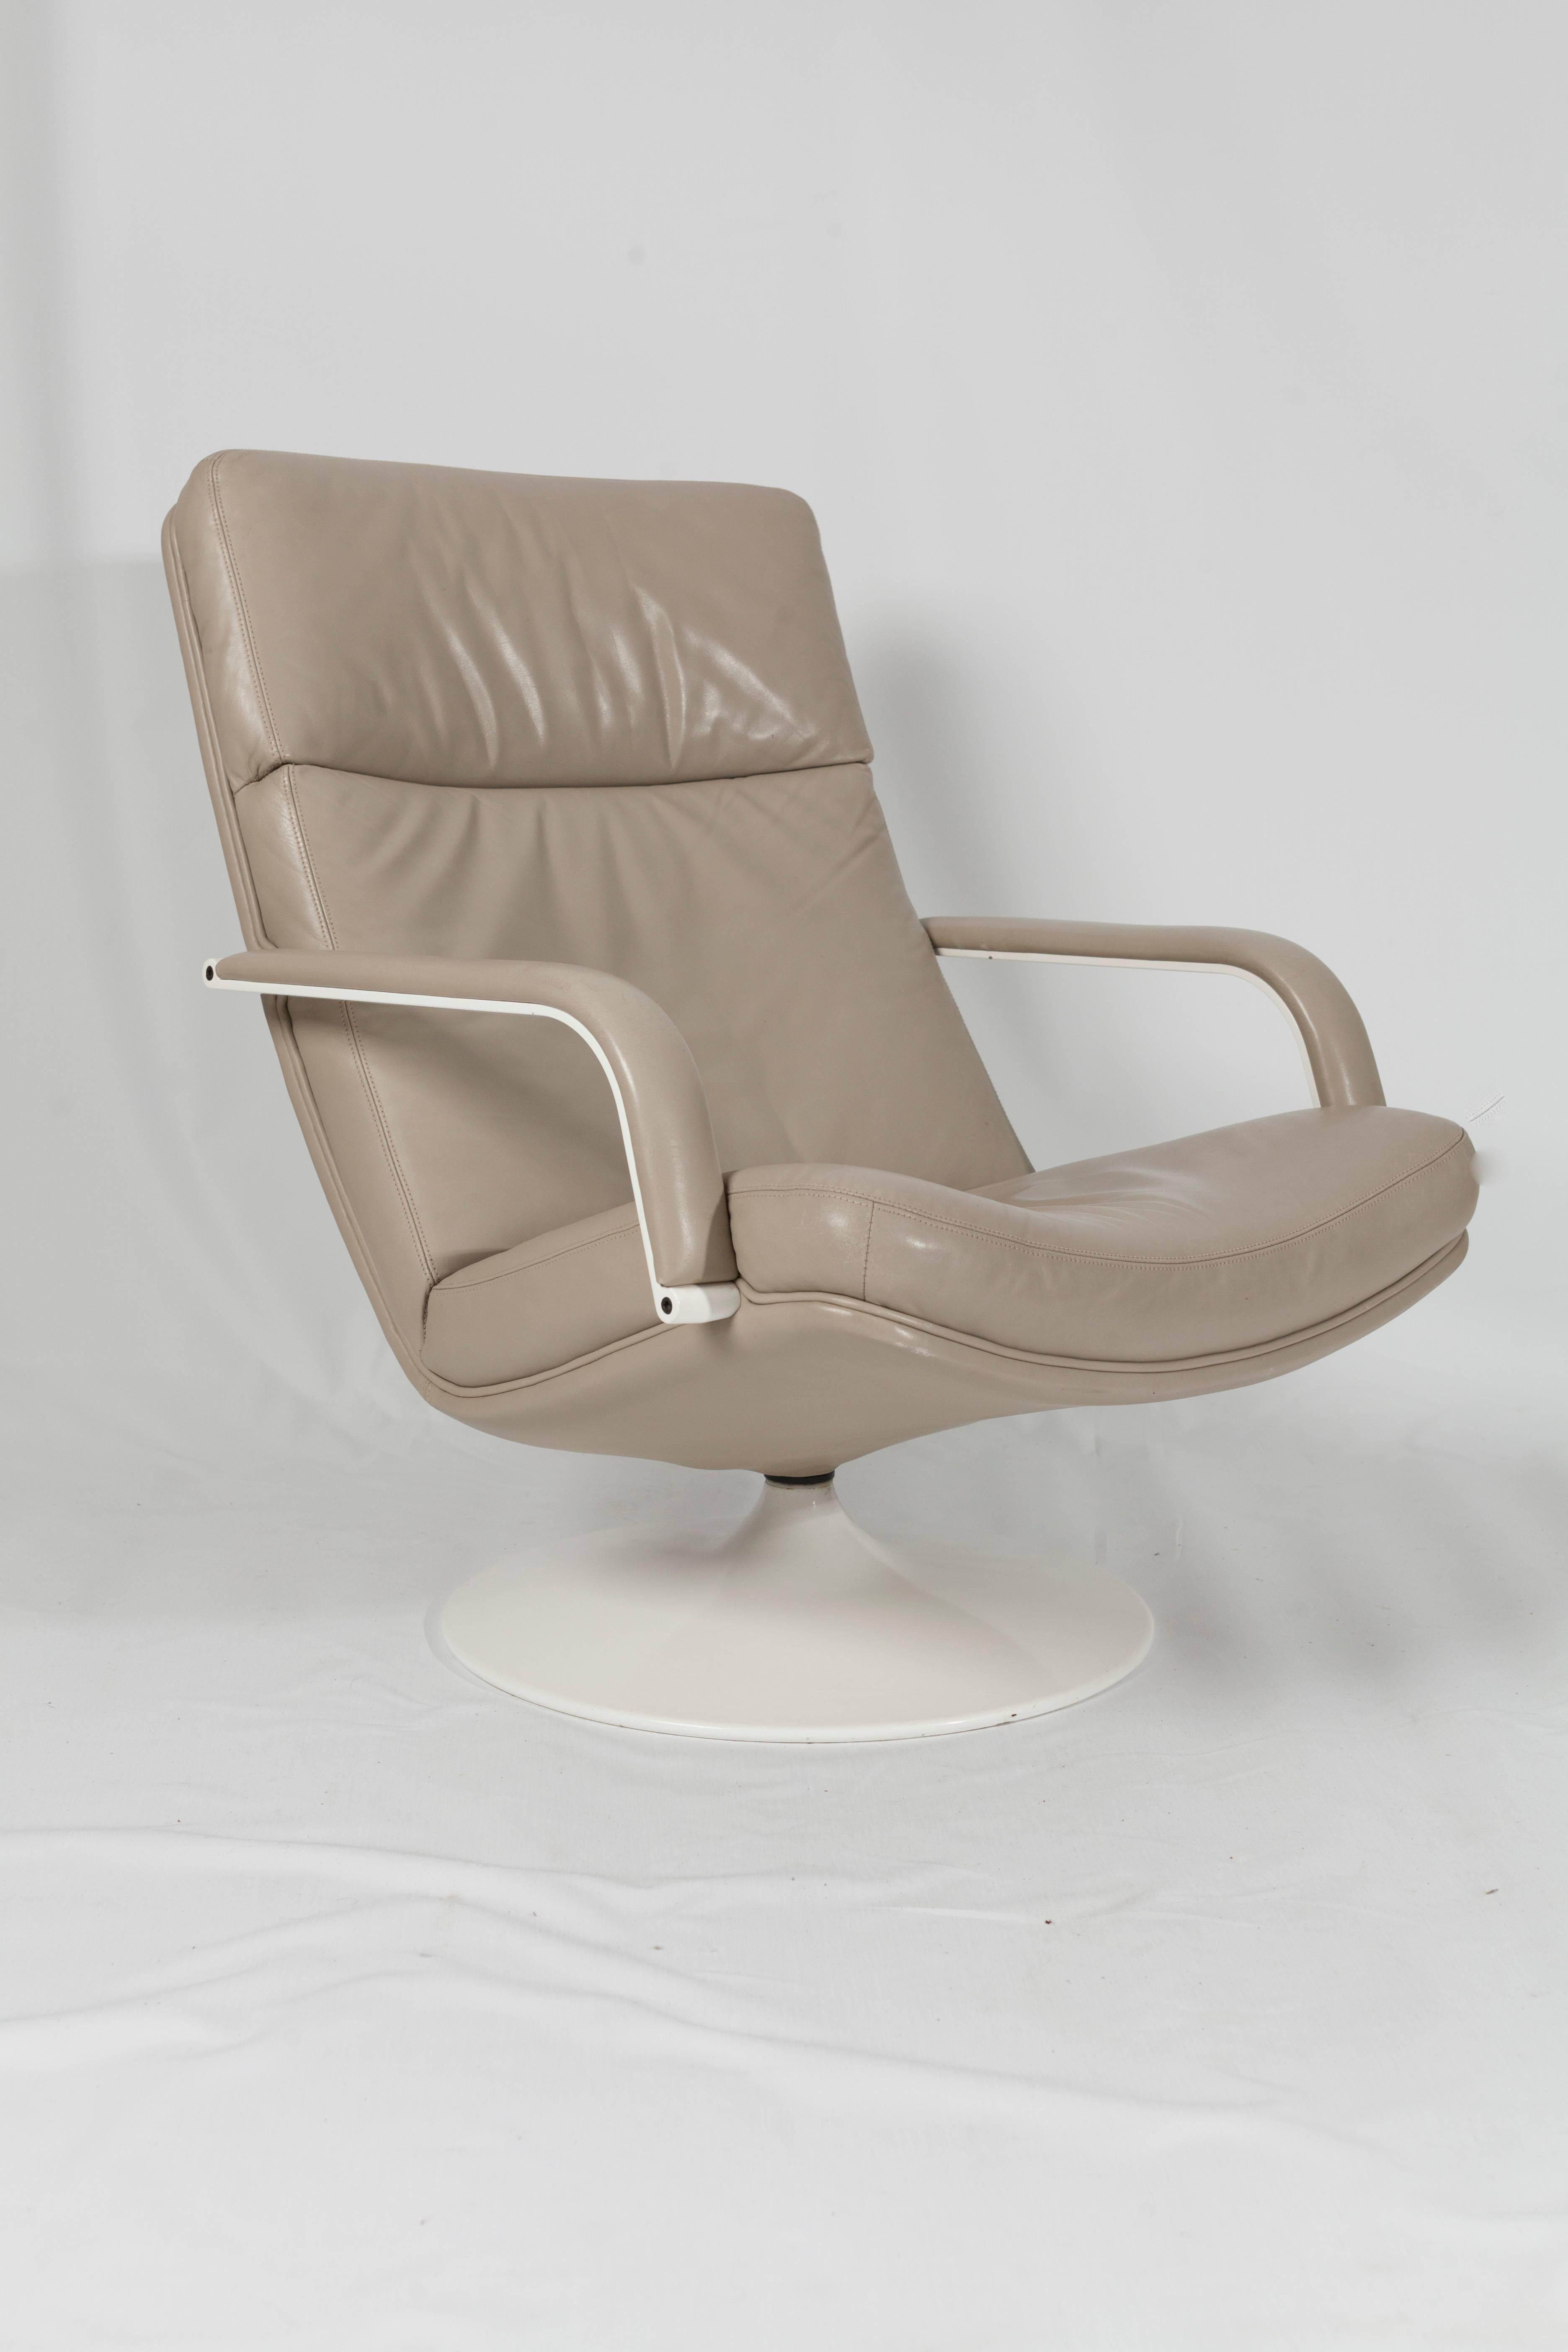 This F156 easy swivel chair with matching Hocker was designed in 1963 by Geoffrey Harcourt for Artifort.
With its steel base in white and beige/taupe leather this is a very chic ensemble.
Dimensions hocker: W 60cm, D 50cm, H 41cm.

Please note